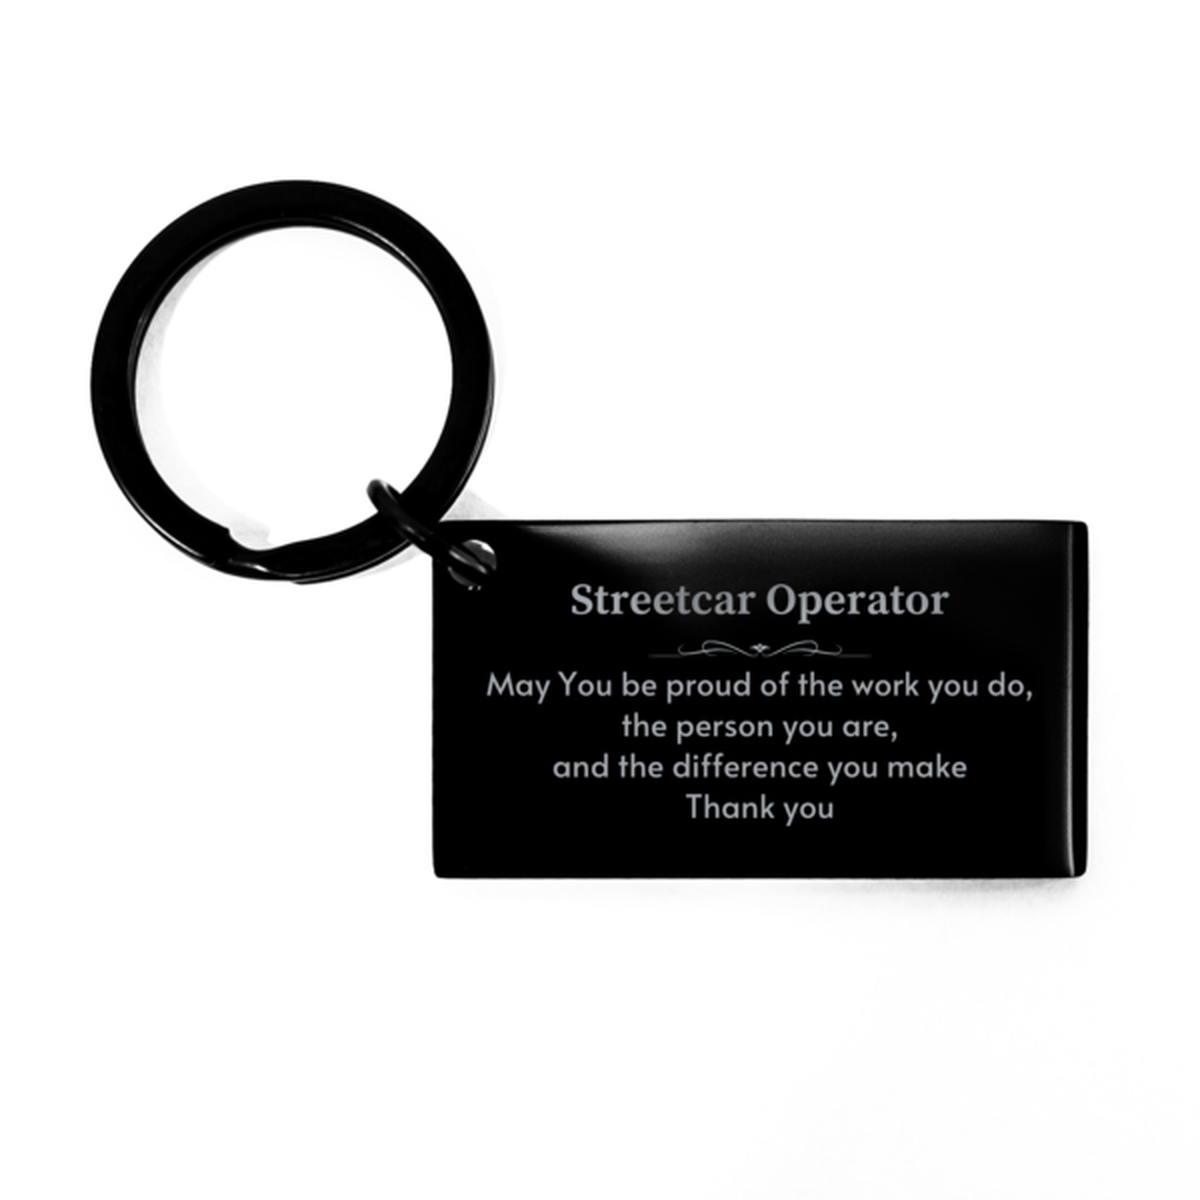 Heartwarming Keychain Retirement Coworkers Gifts for Streetcar Operator, Warden May You be proud of the work you do, the person you are Gifts for Boss Men Women Friends